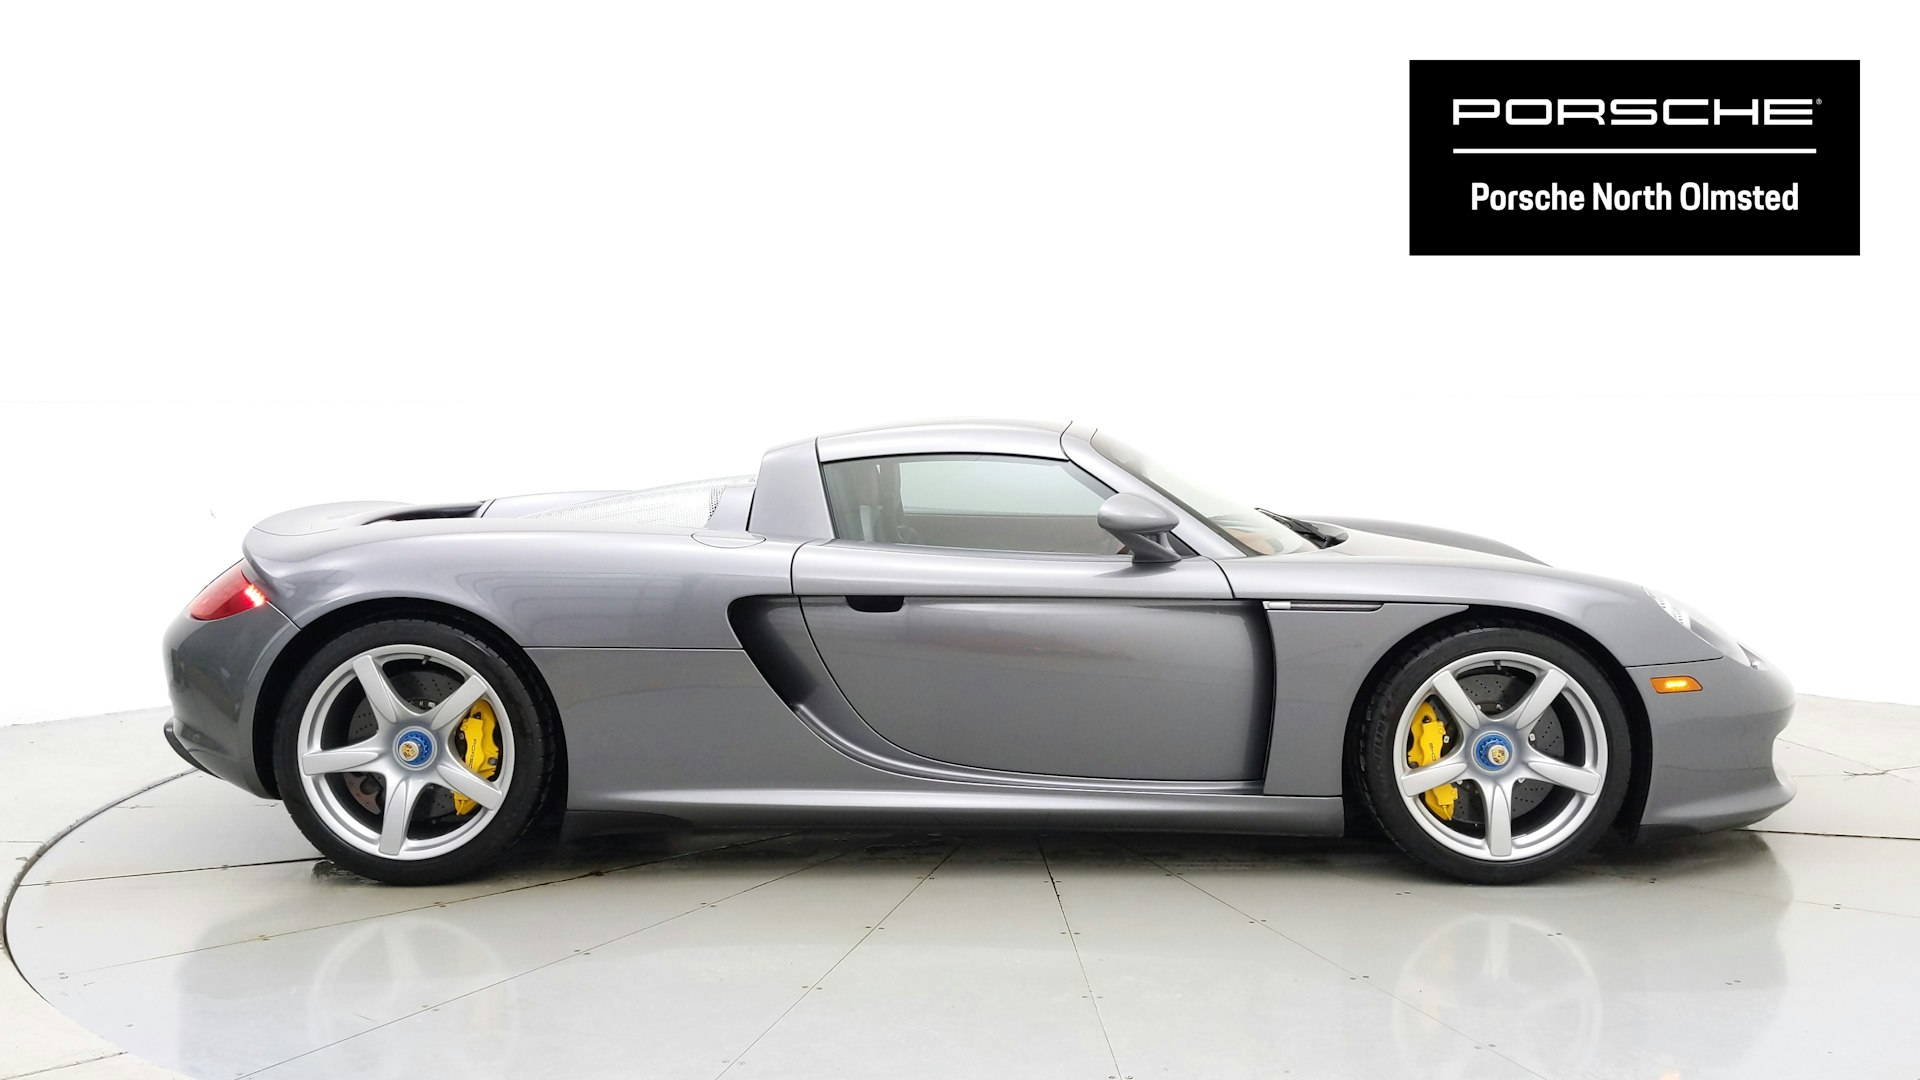 Pre-Owned 2005 Porsche Carrera GT 2D Coupe in North Olmsted #P2223 | Porsche  North Olmsted